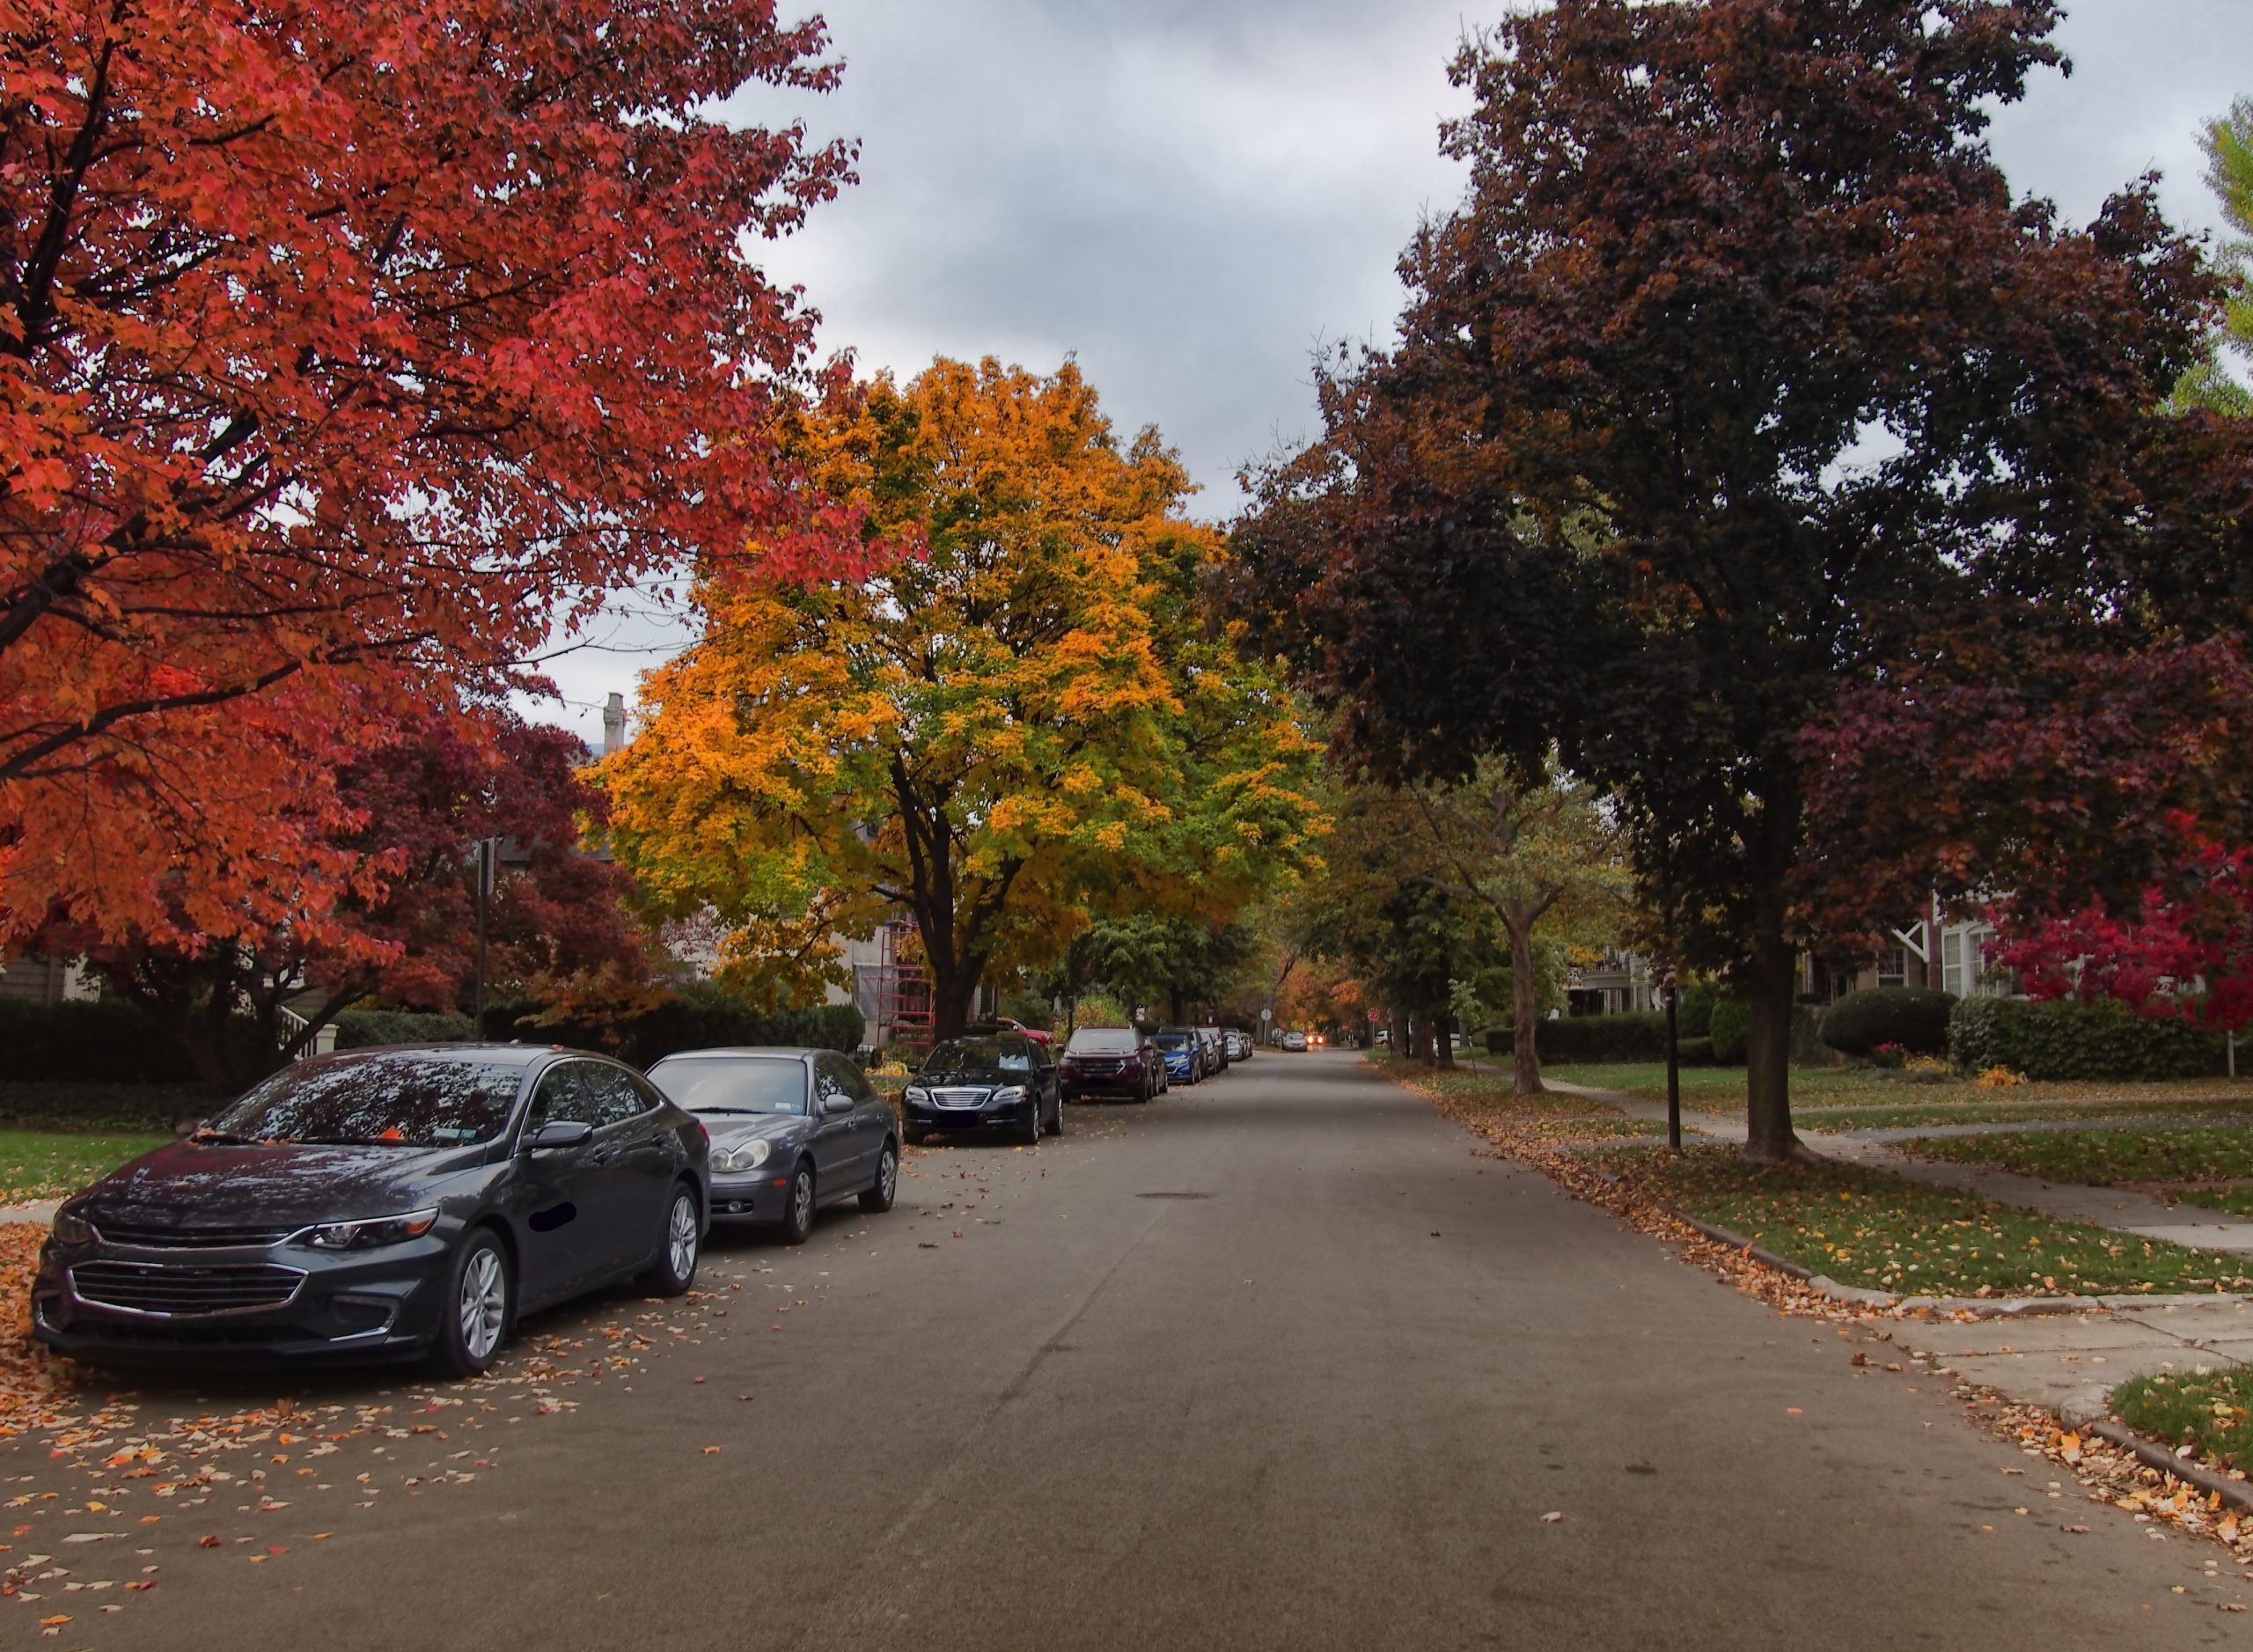 Cars parked along a residential road in autumn.